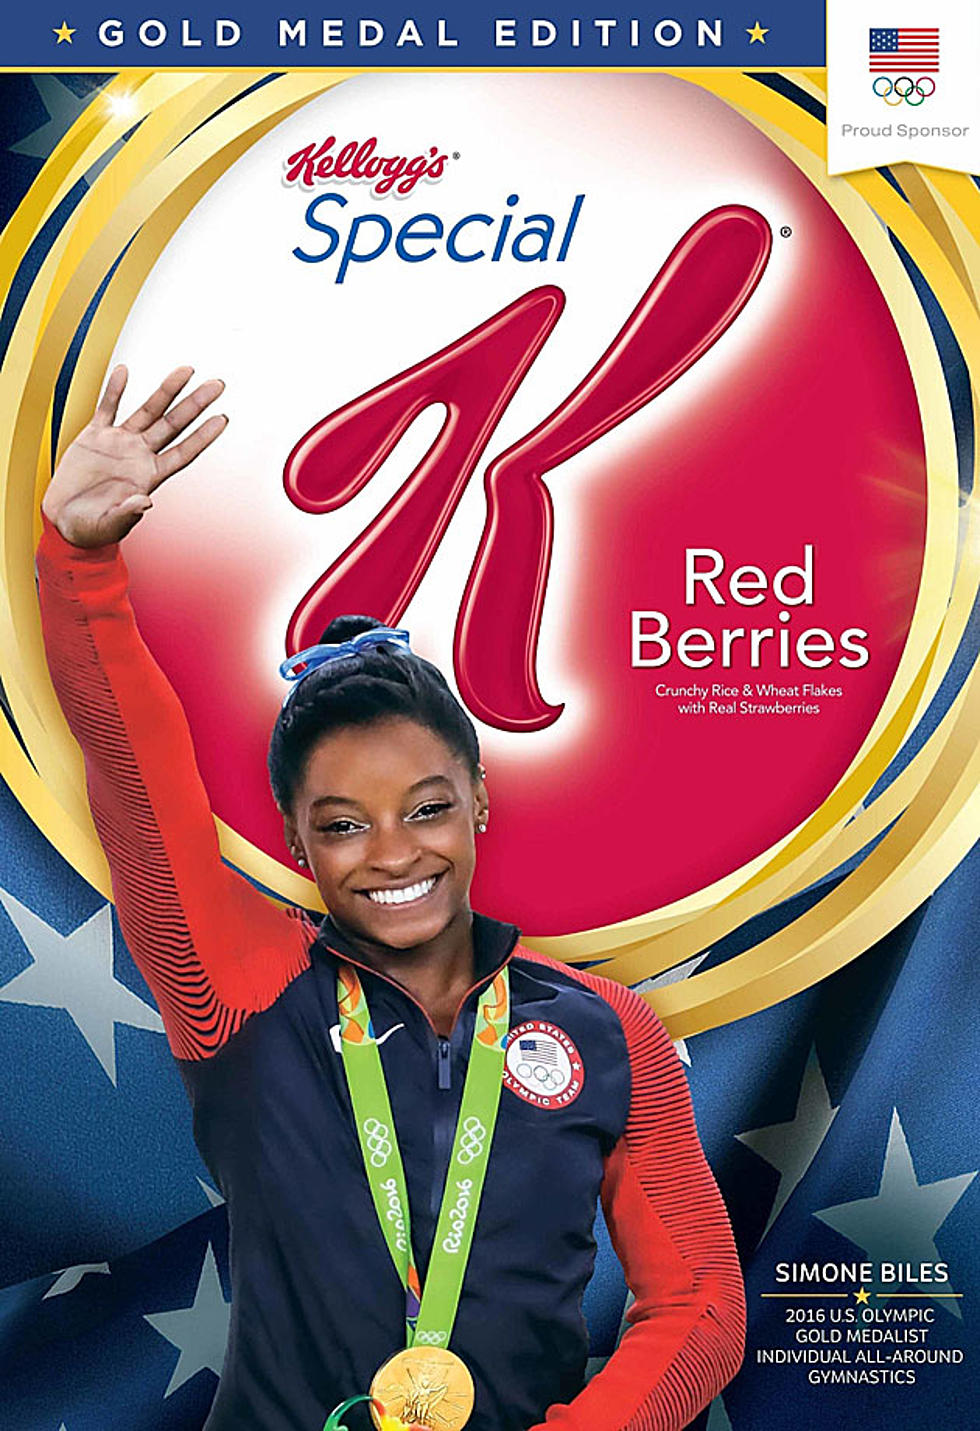 Gold Medal-Winning US Women&#8217;s Gymnastics Team to Appear on Special K Boxes